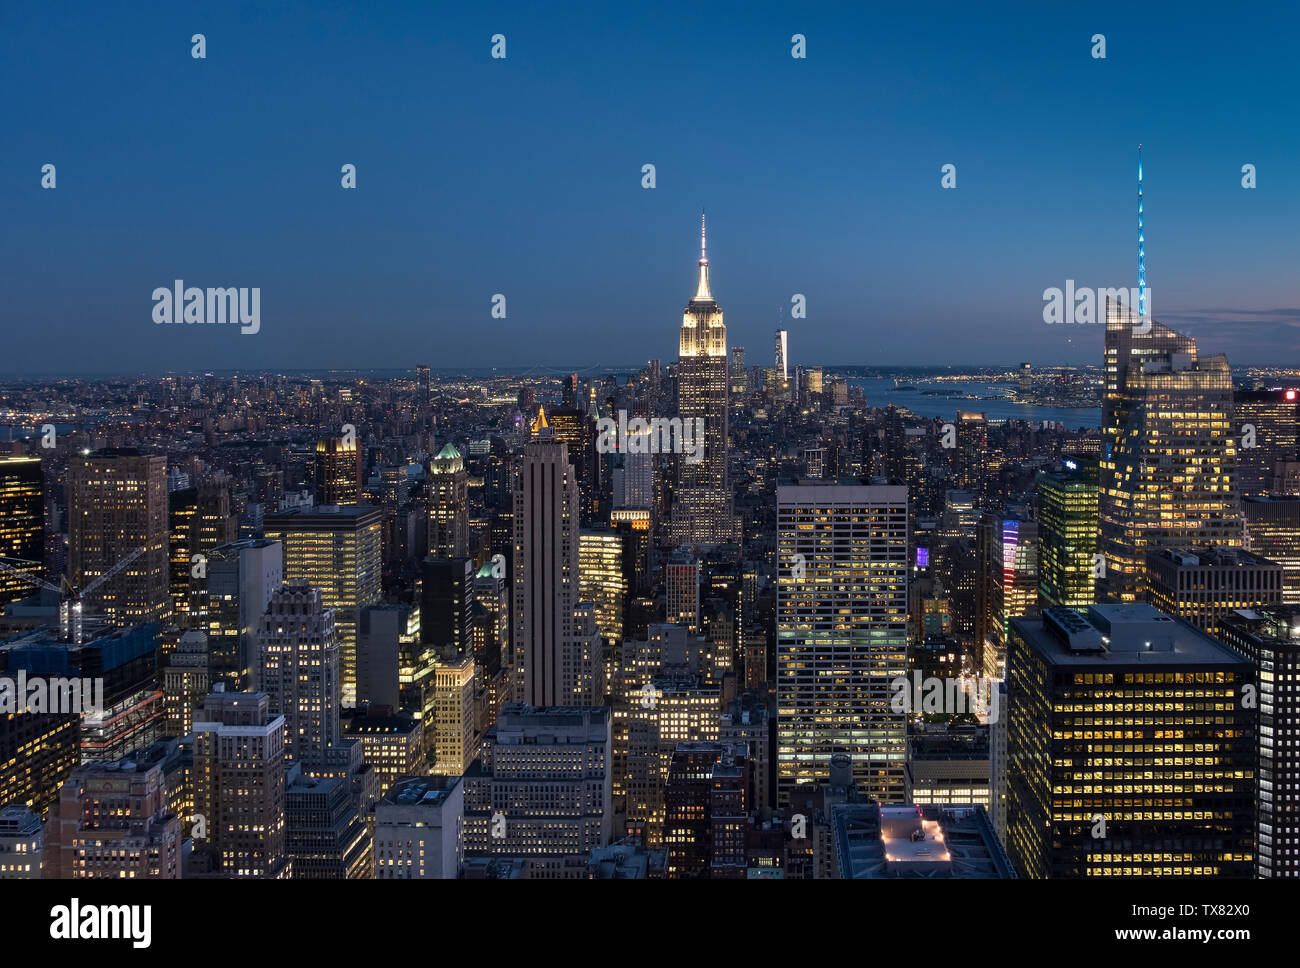 The Empire State Building & Lower Manhattan at night, New York, USA Stock Photo